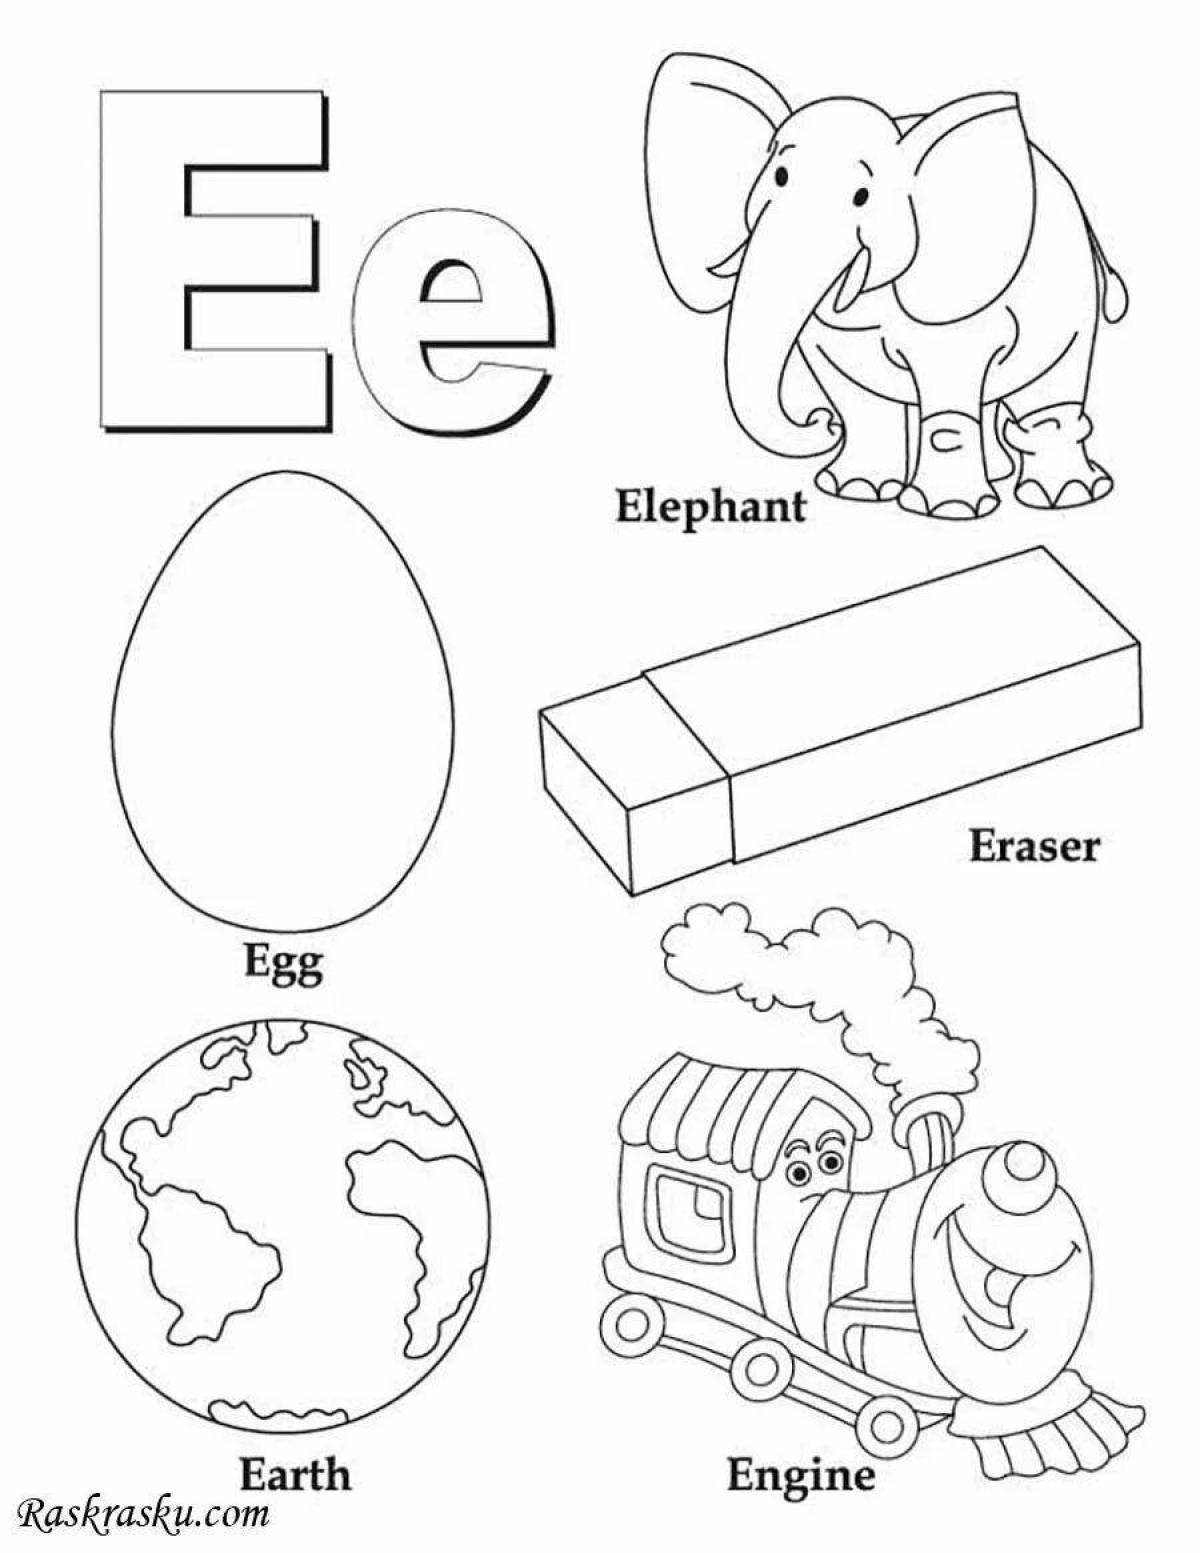 A fun coloring book with alphabet letters